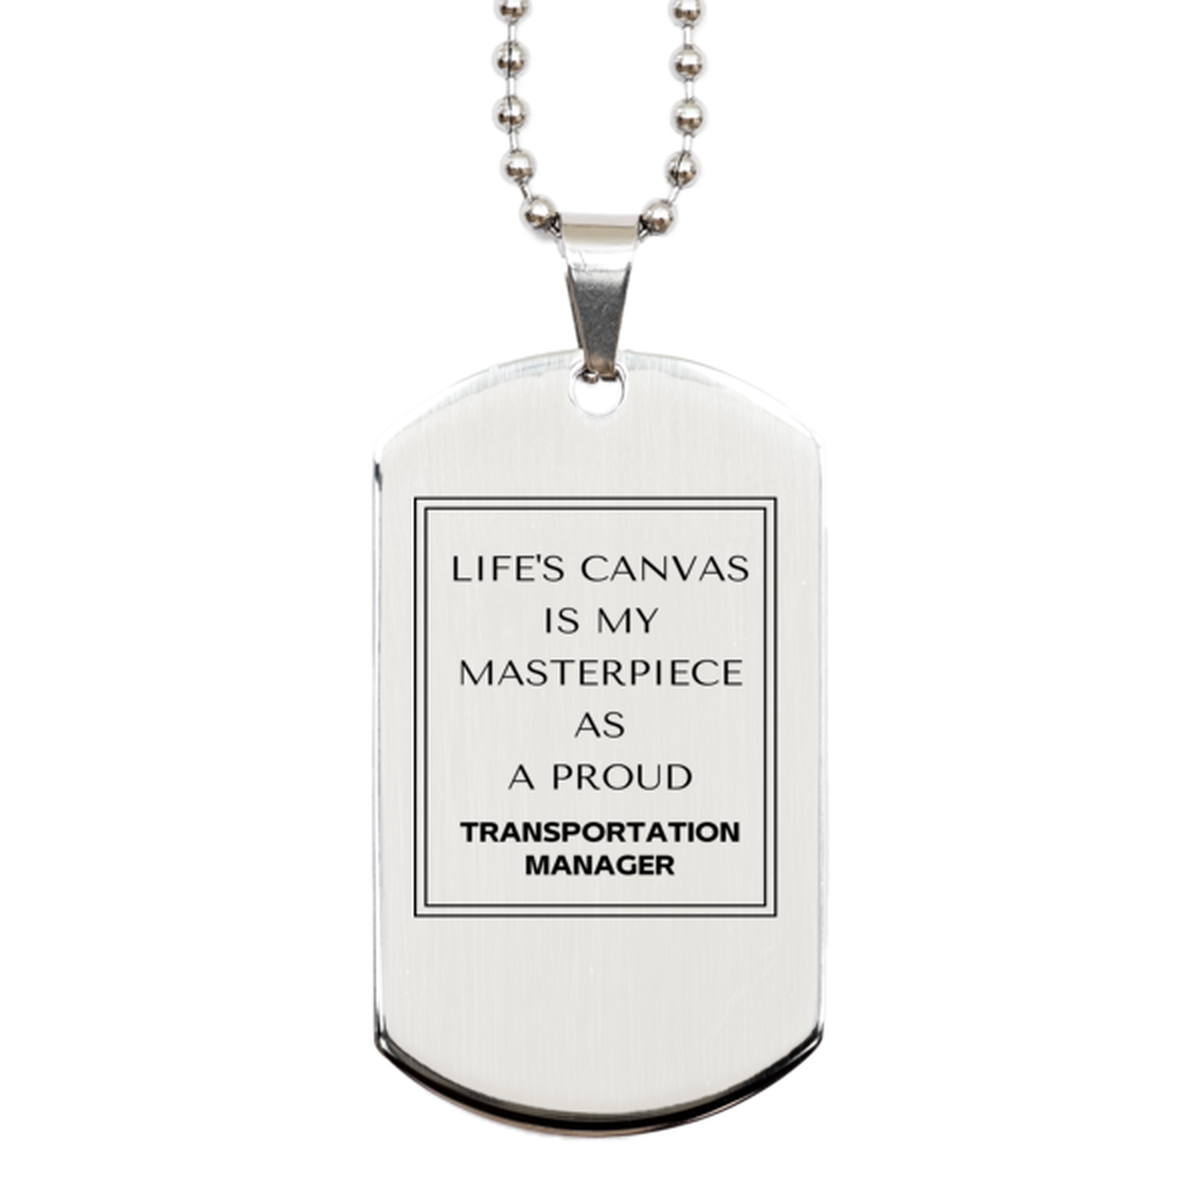 Proud Transportation Manager Gifts, Life's canvas is my masterpiece, Epic Birthday Christmas Unique Silver Dog Tag For Transportation Manager, Coworkers, Men, Women, Friends